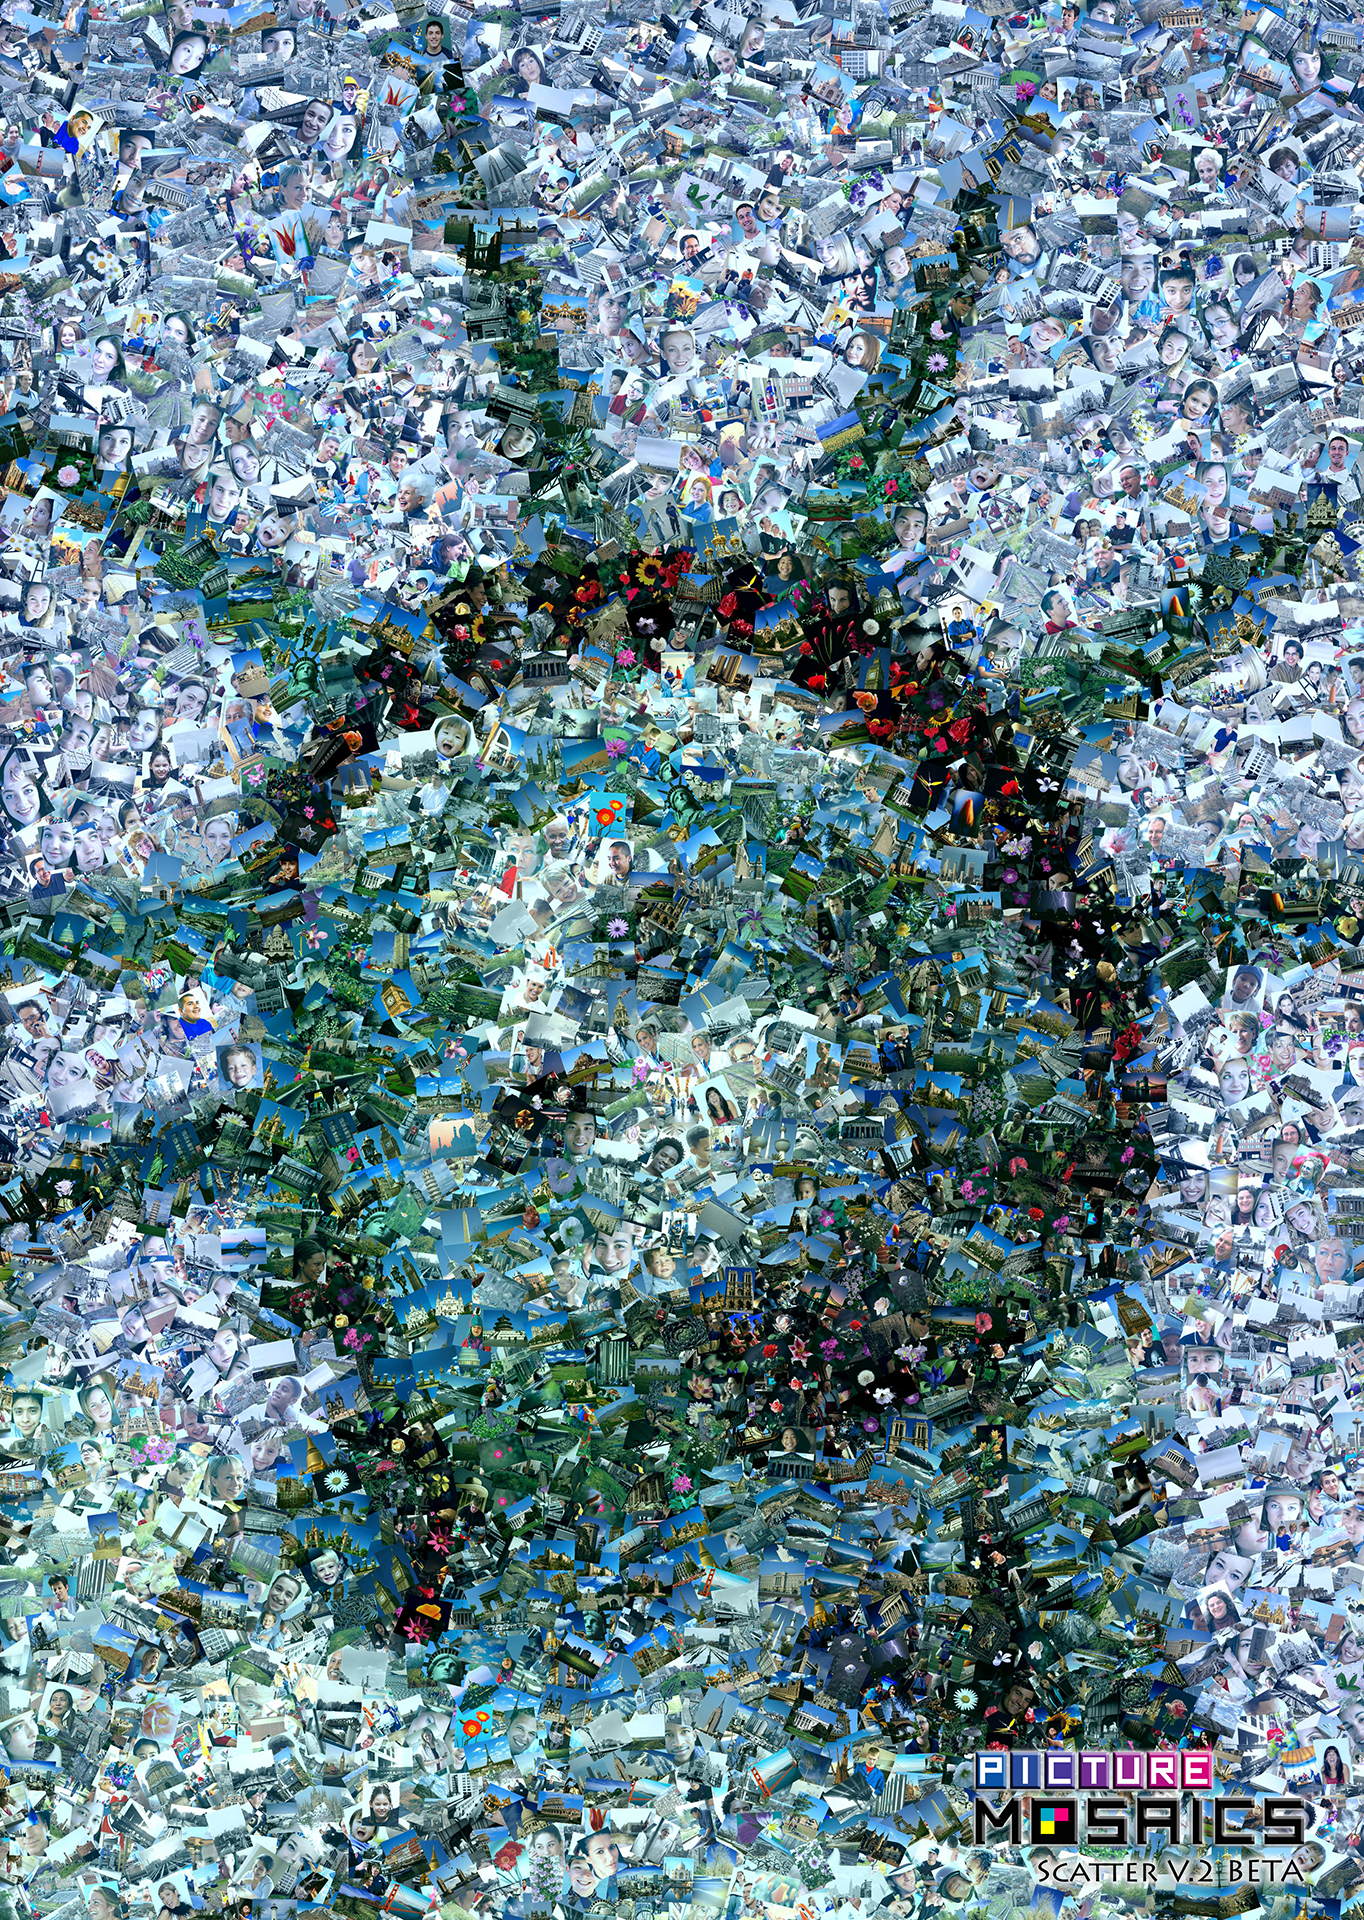 photo mosaic Using our new Scatter V.2 (Beta) technology, photos were arranged in a chaotic yet structured manor to create this unique mosaic